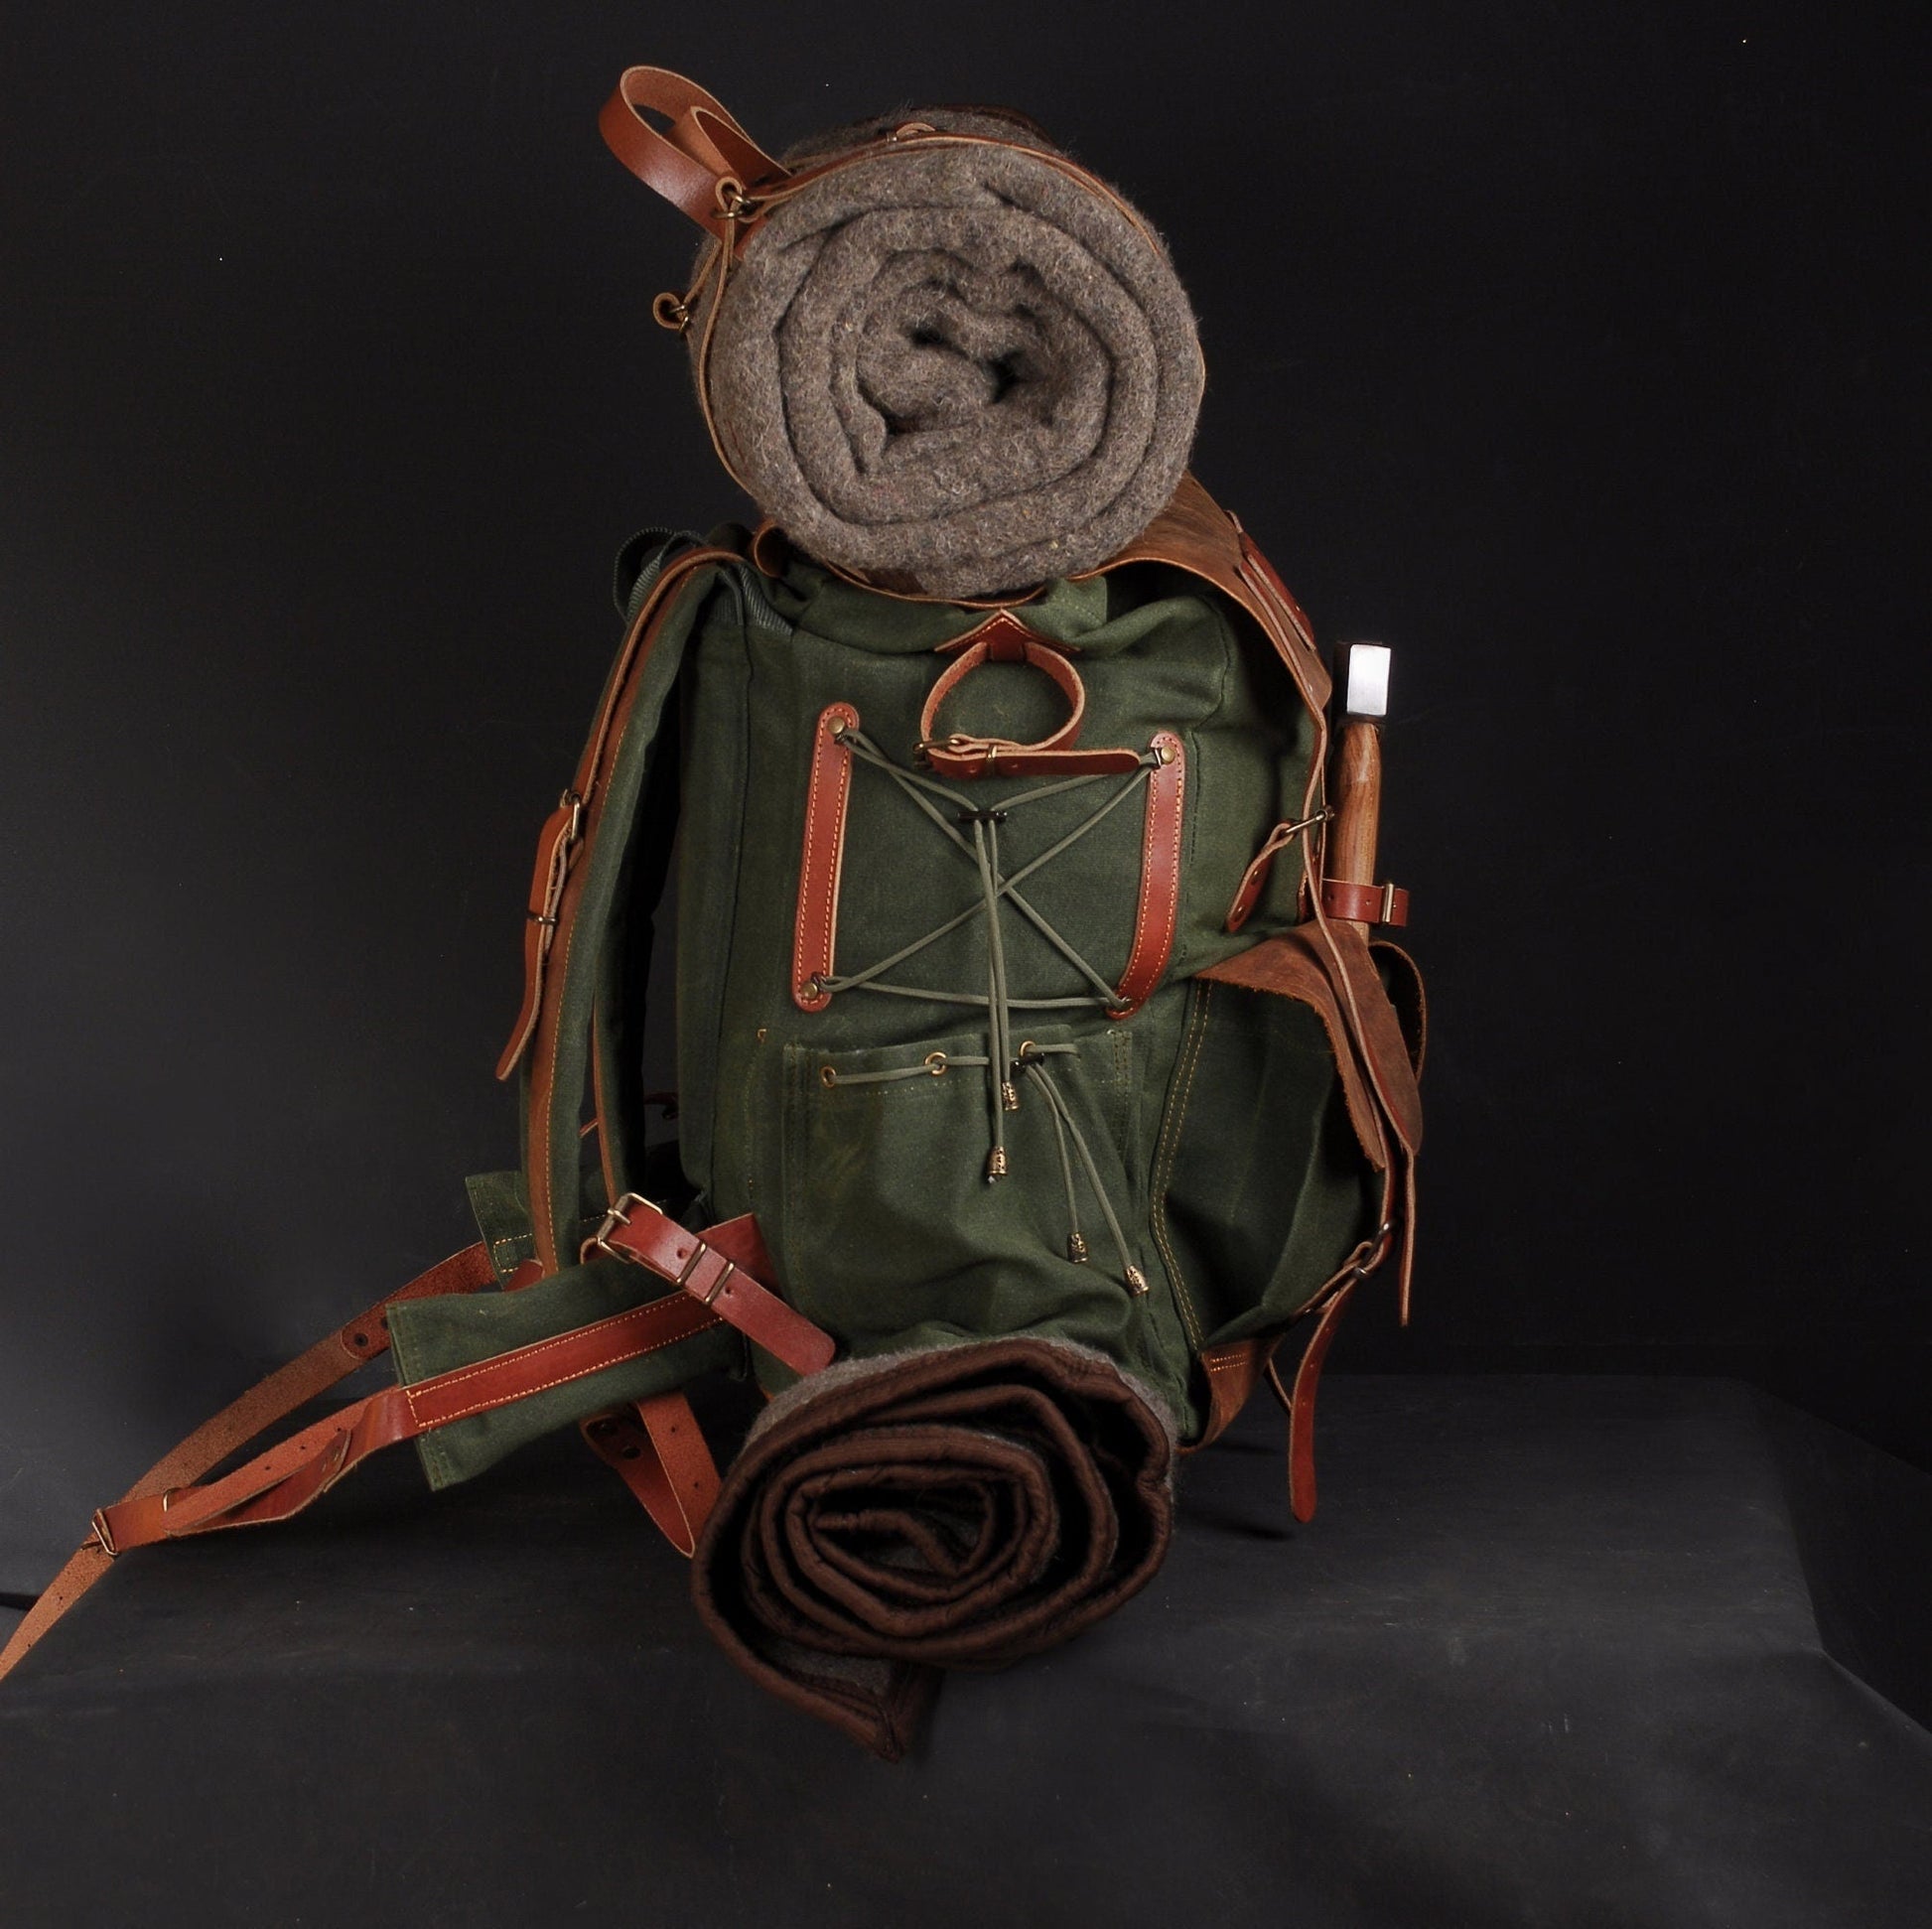 Vintage Waxed Canvas Backpack 28L - Large Capacity, Genuine